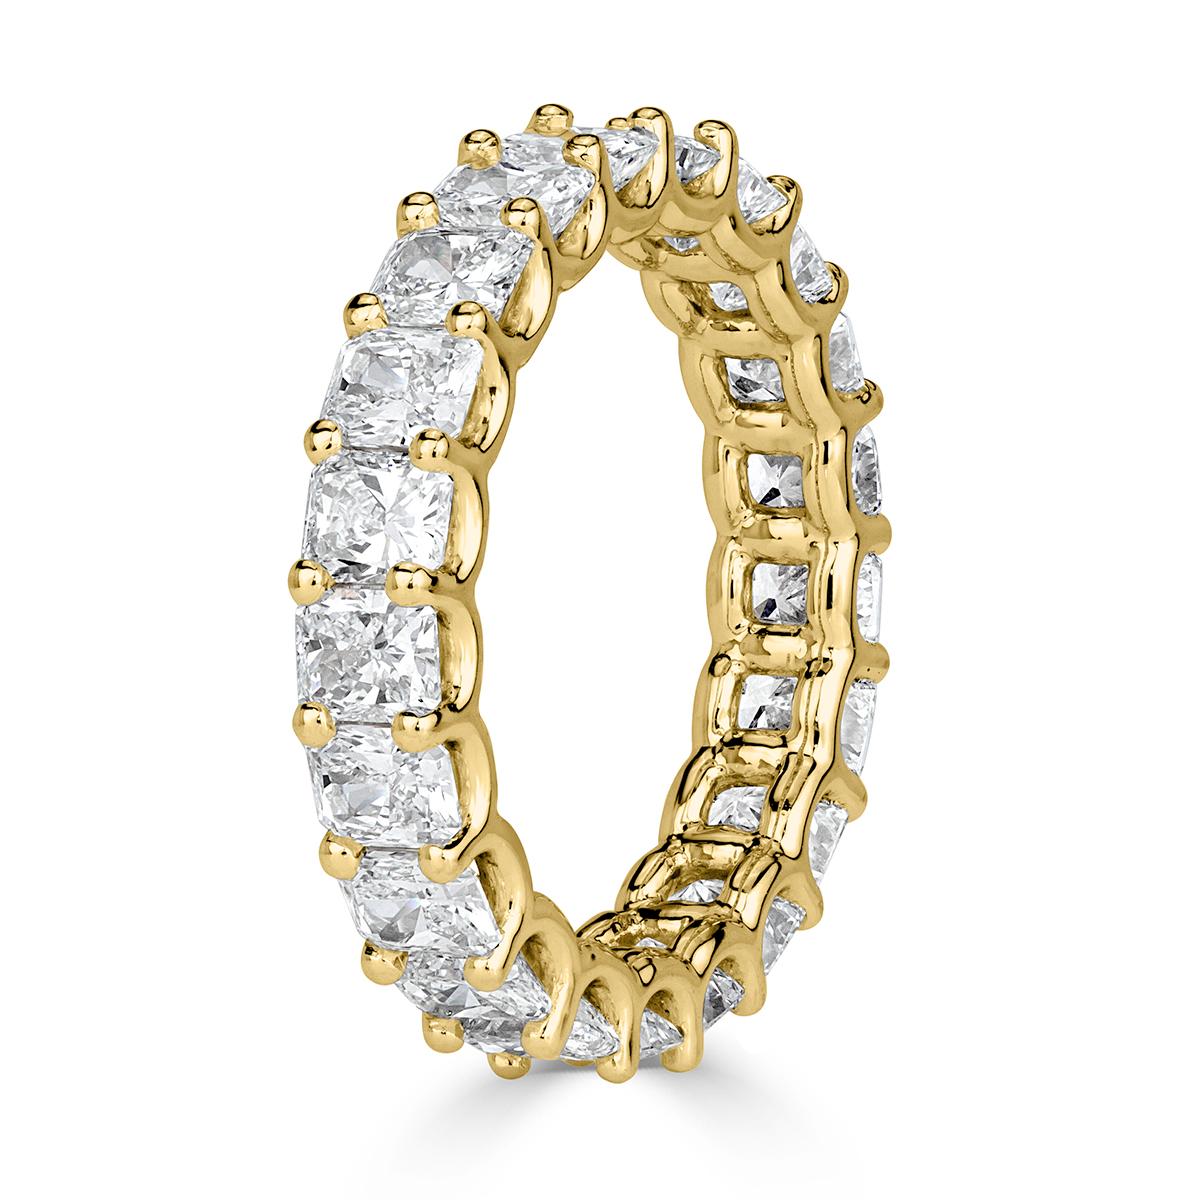 Custom created in 18k yellow gold, this stunning diamond eternity band showacses 4.14ct of radiant cut diamonds graded at E-F, VS1-VS2. They are set in a 